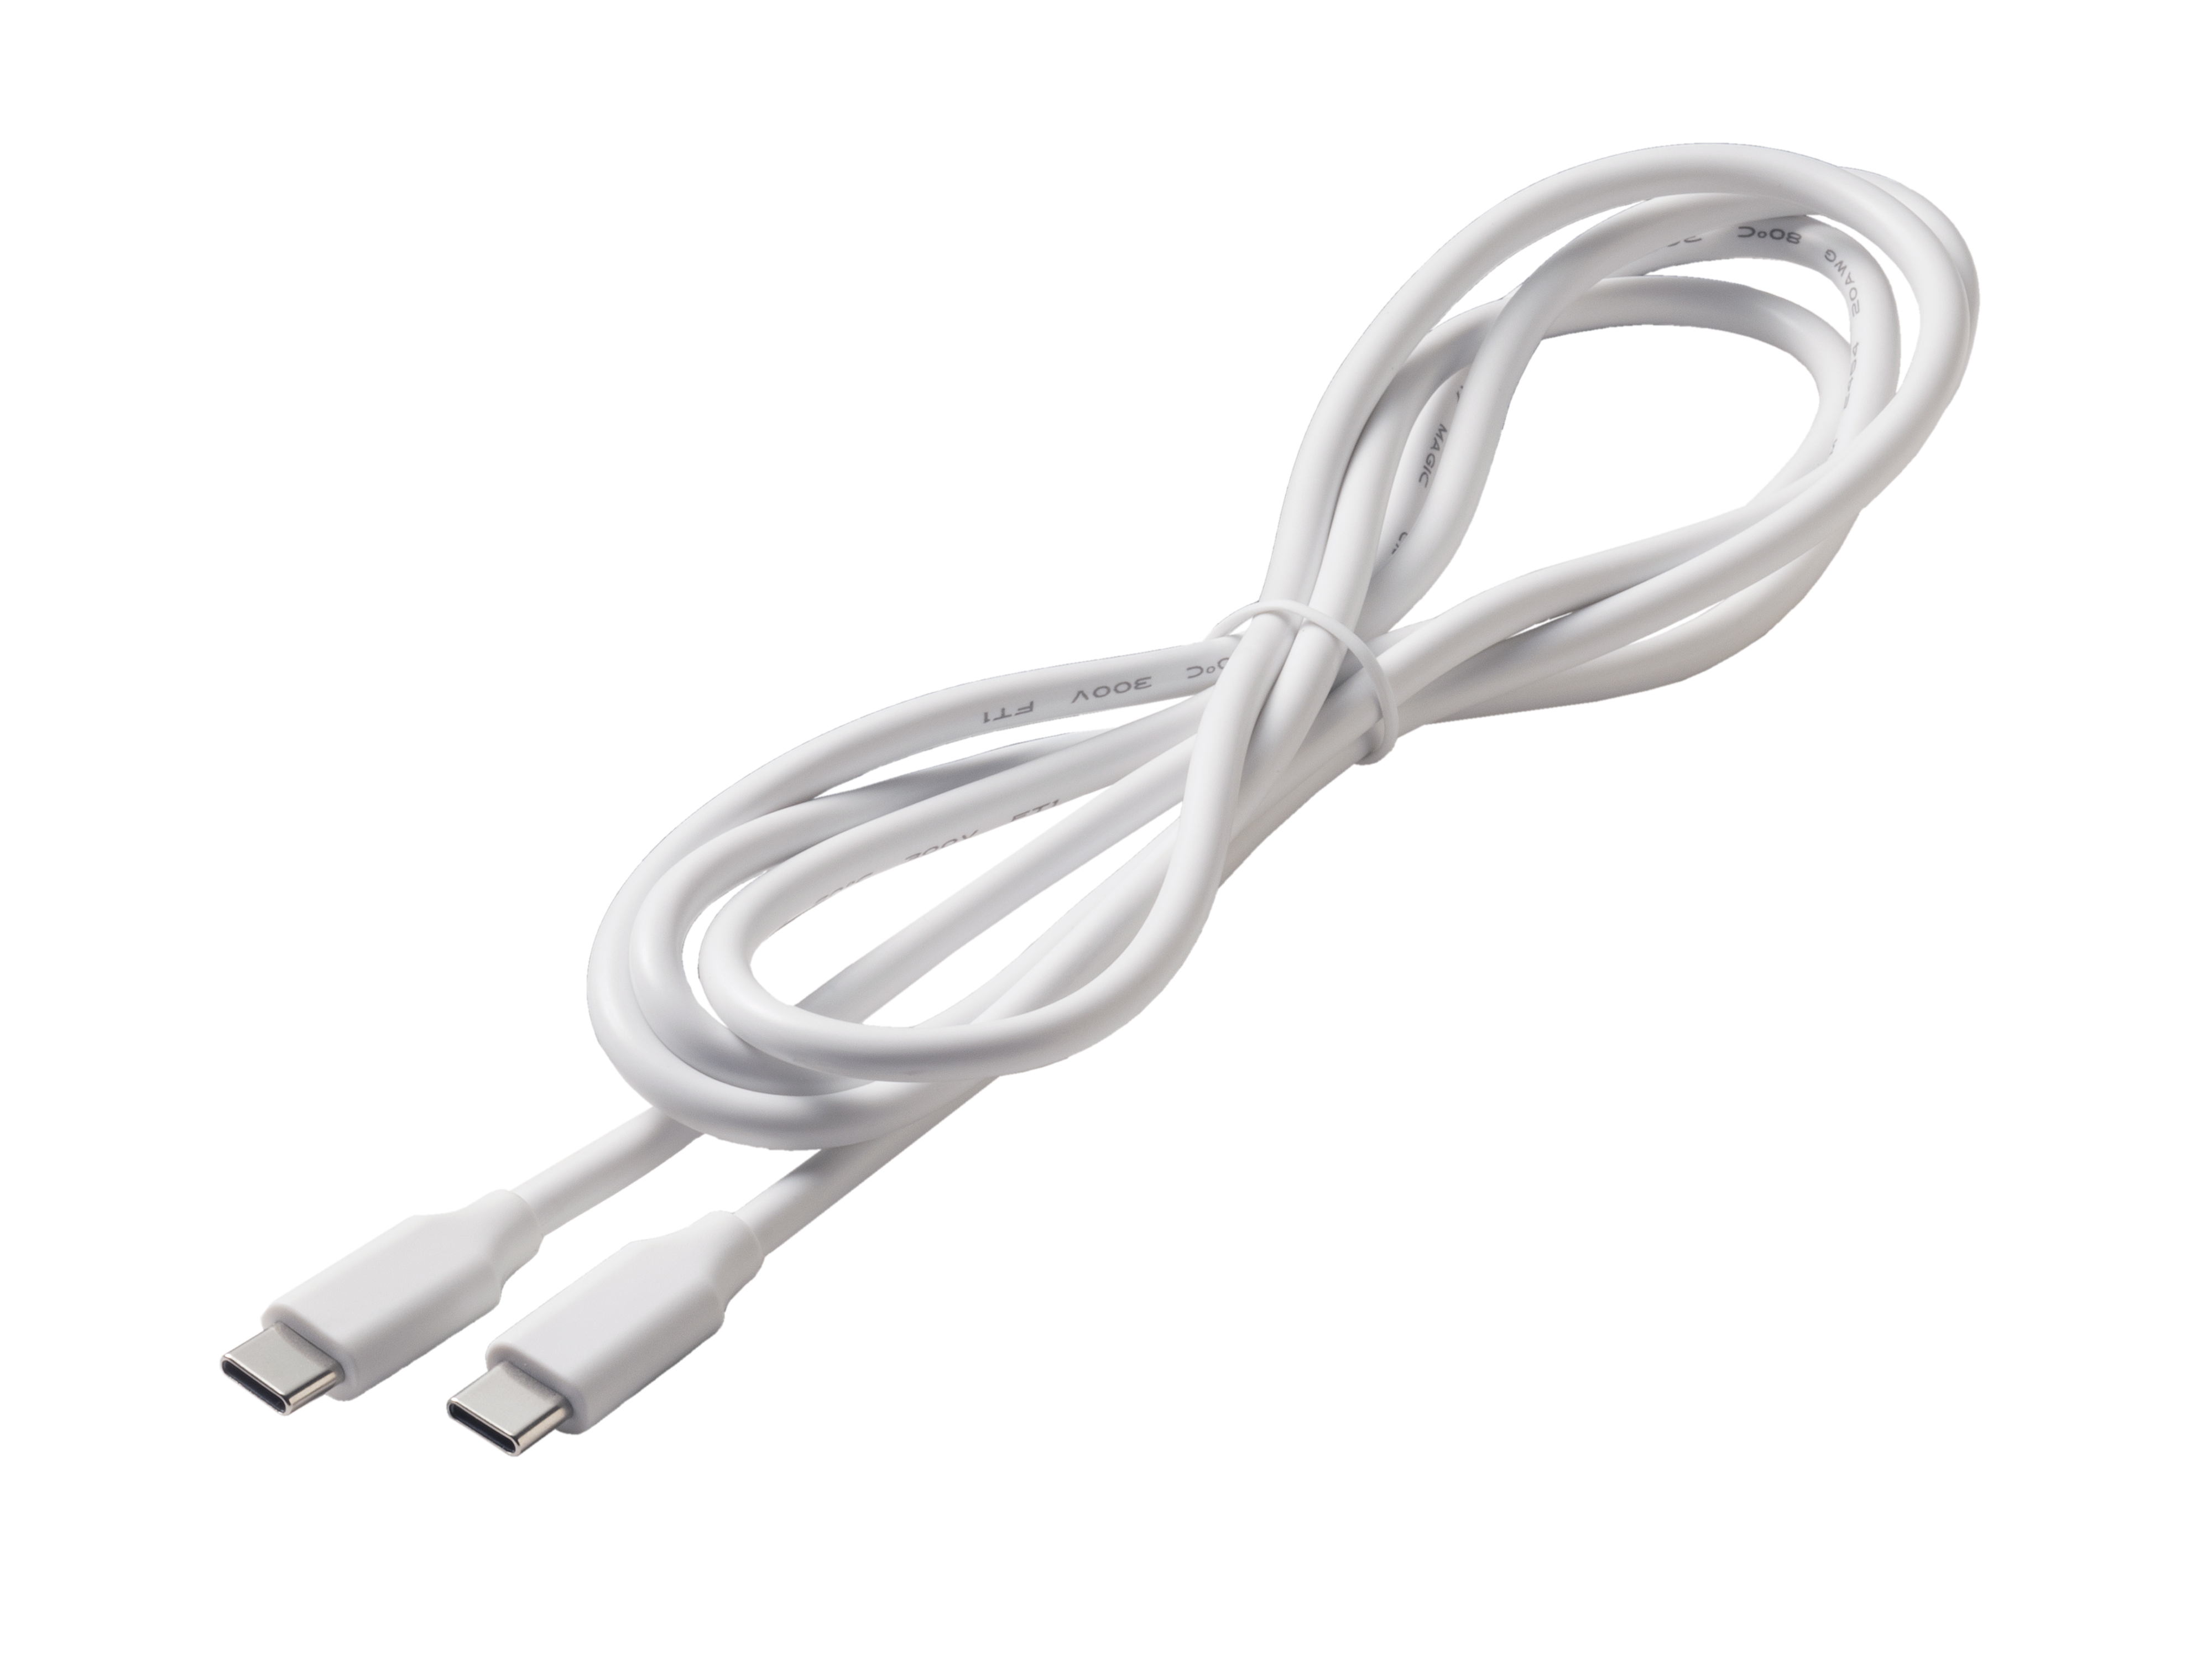 Extension cable (USB-C to USB-C) rc 1.5m apple white - SUNNY